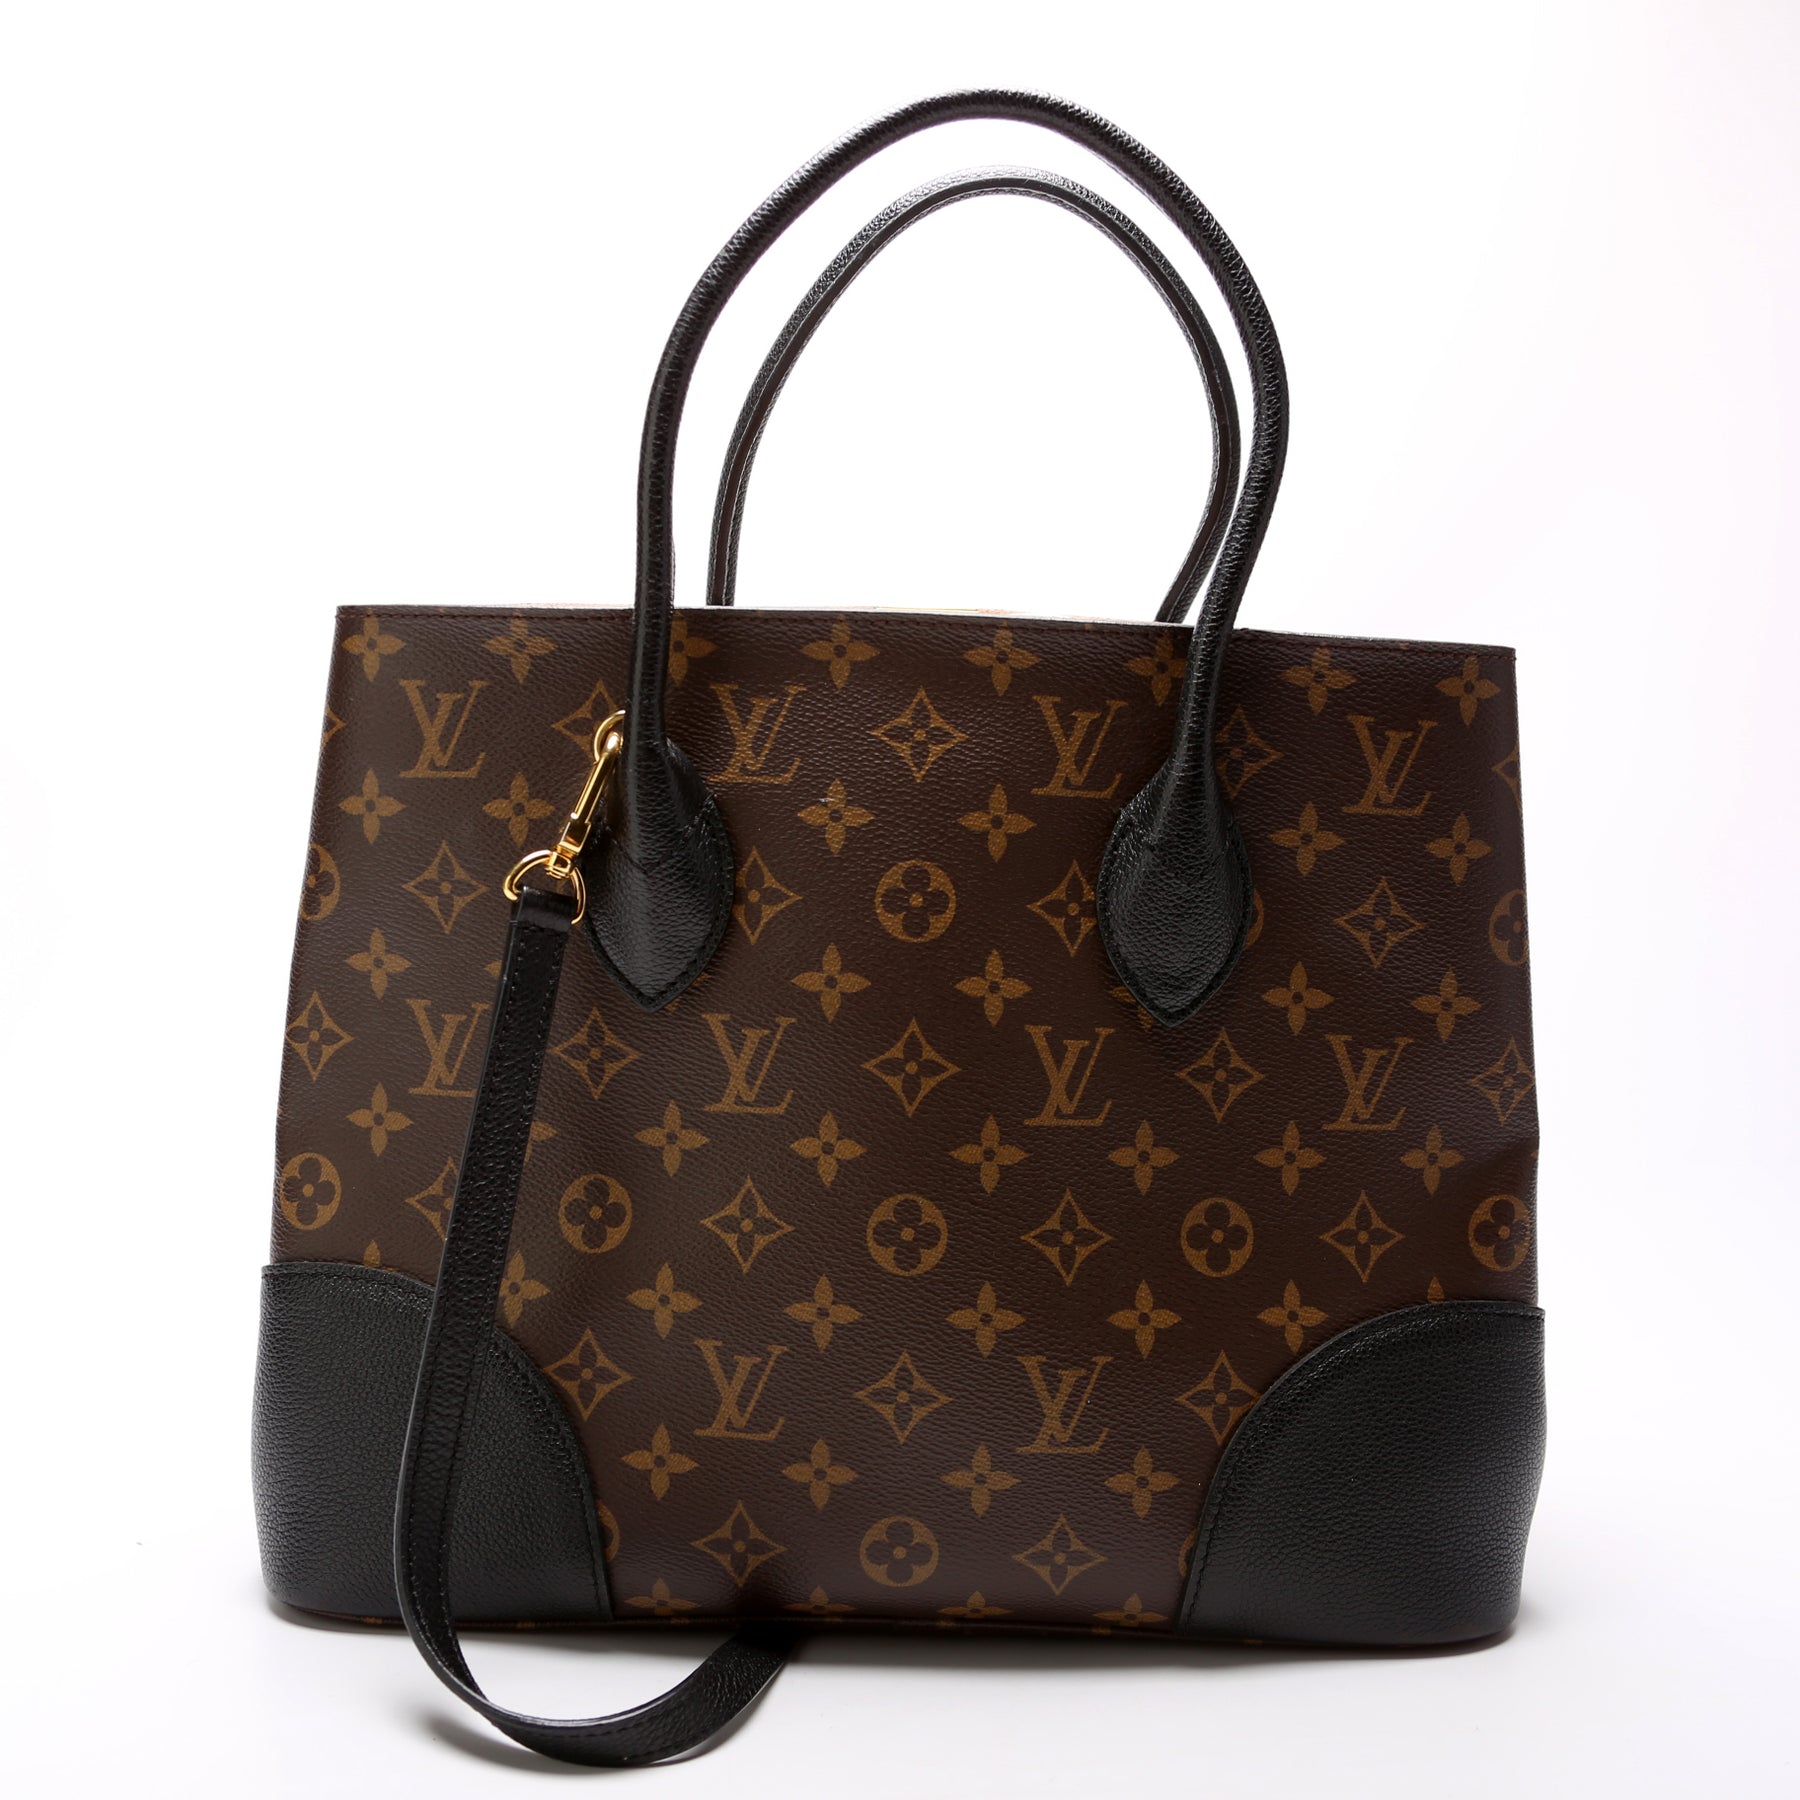 Flanerie leather handbag Louis Vuitton Brown in Leather - 30633156